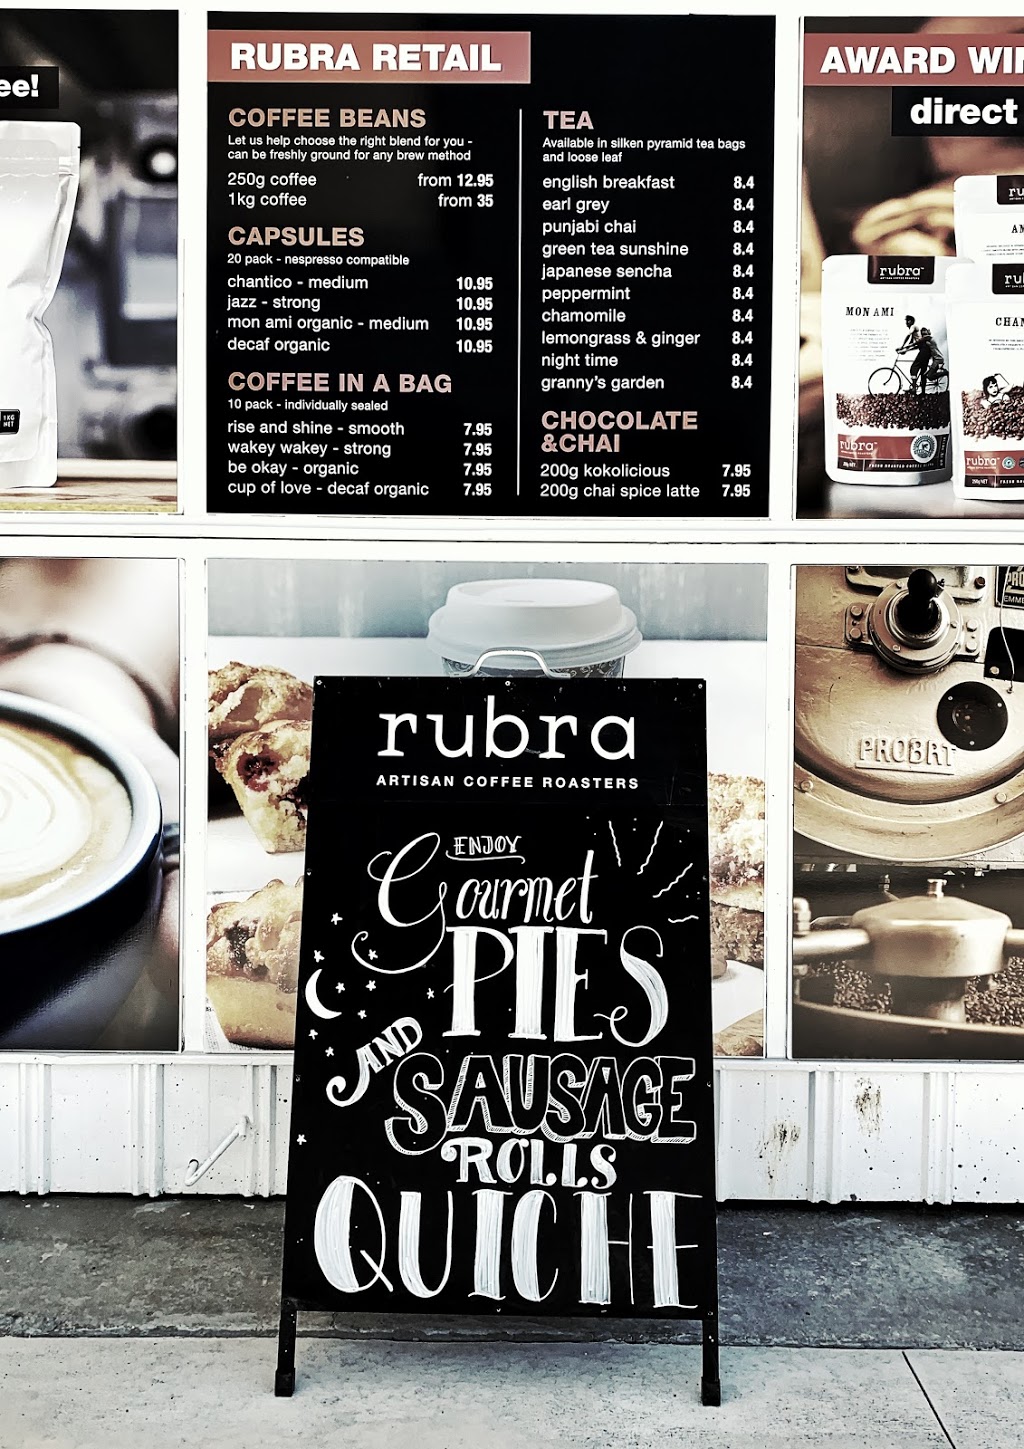 Rubra on the Go Middle Swan | cafe | 53 Great Northern Hwy, Middle Swan WA 6056, Australia | 0893146299 OR +61 8 9314 6299